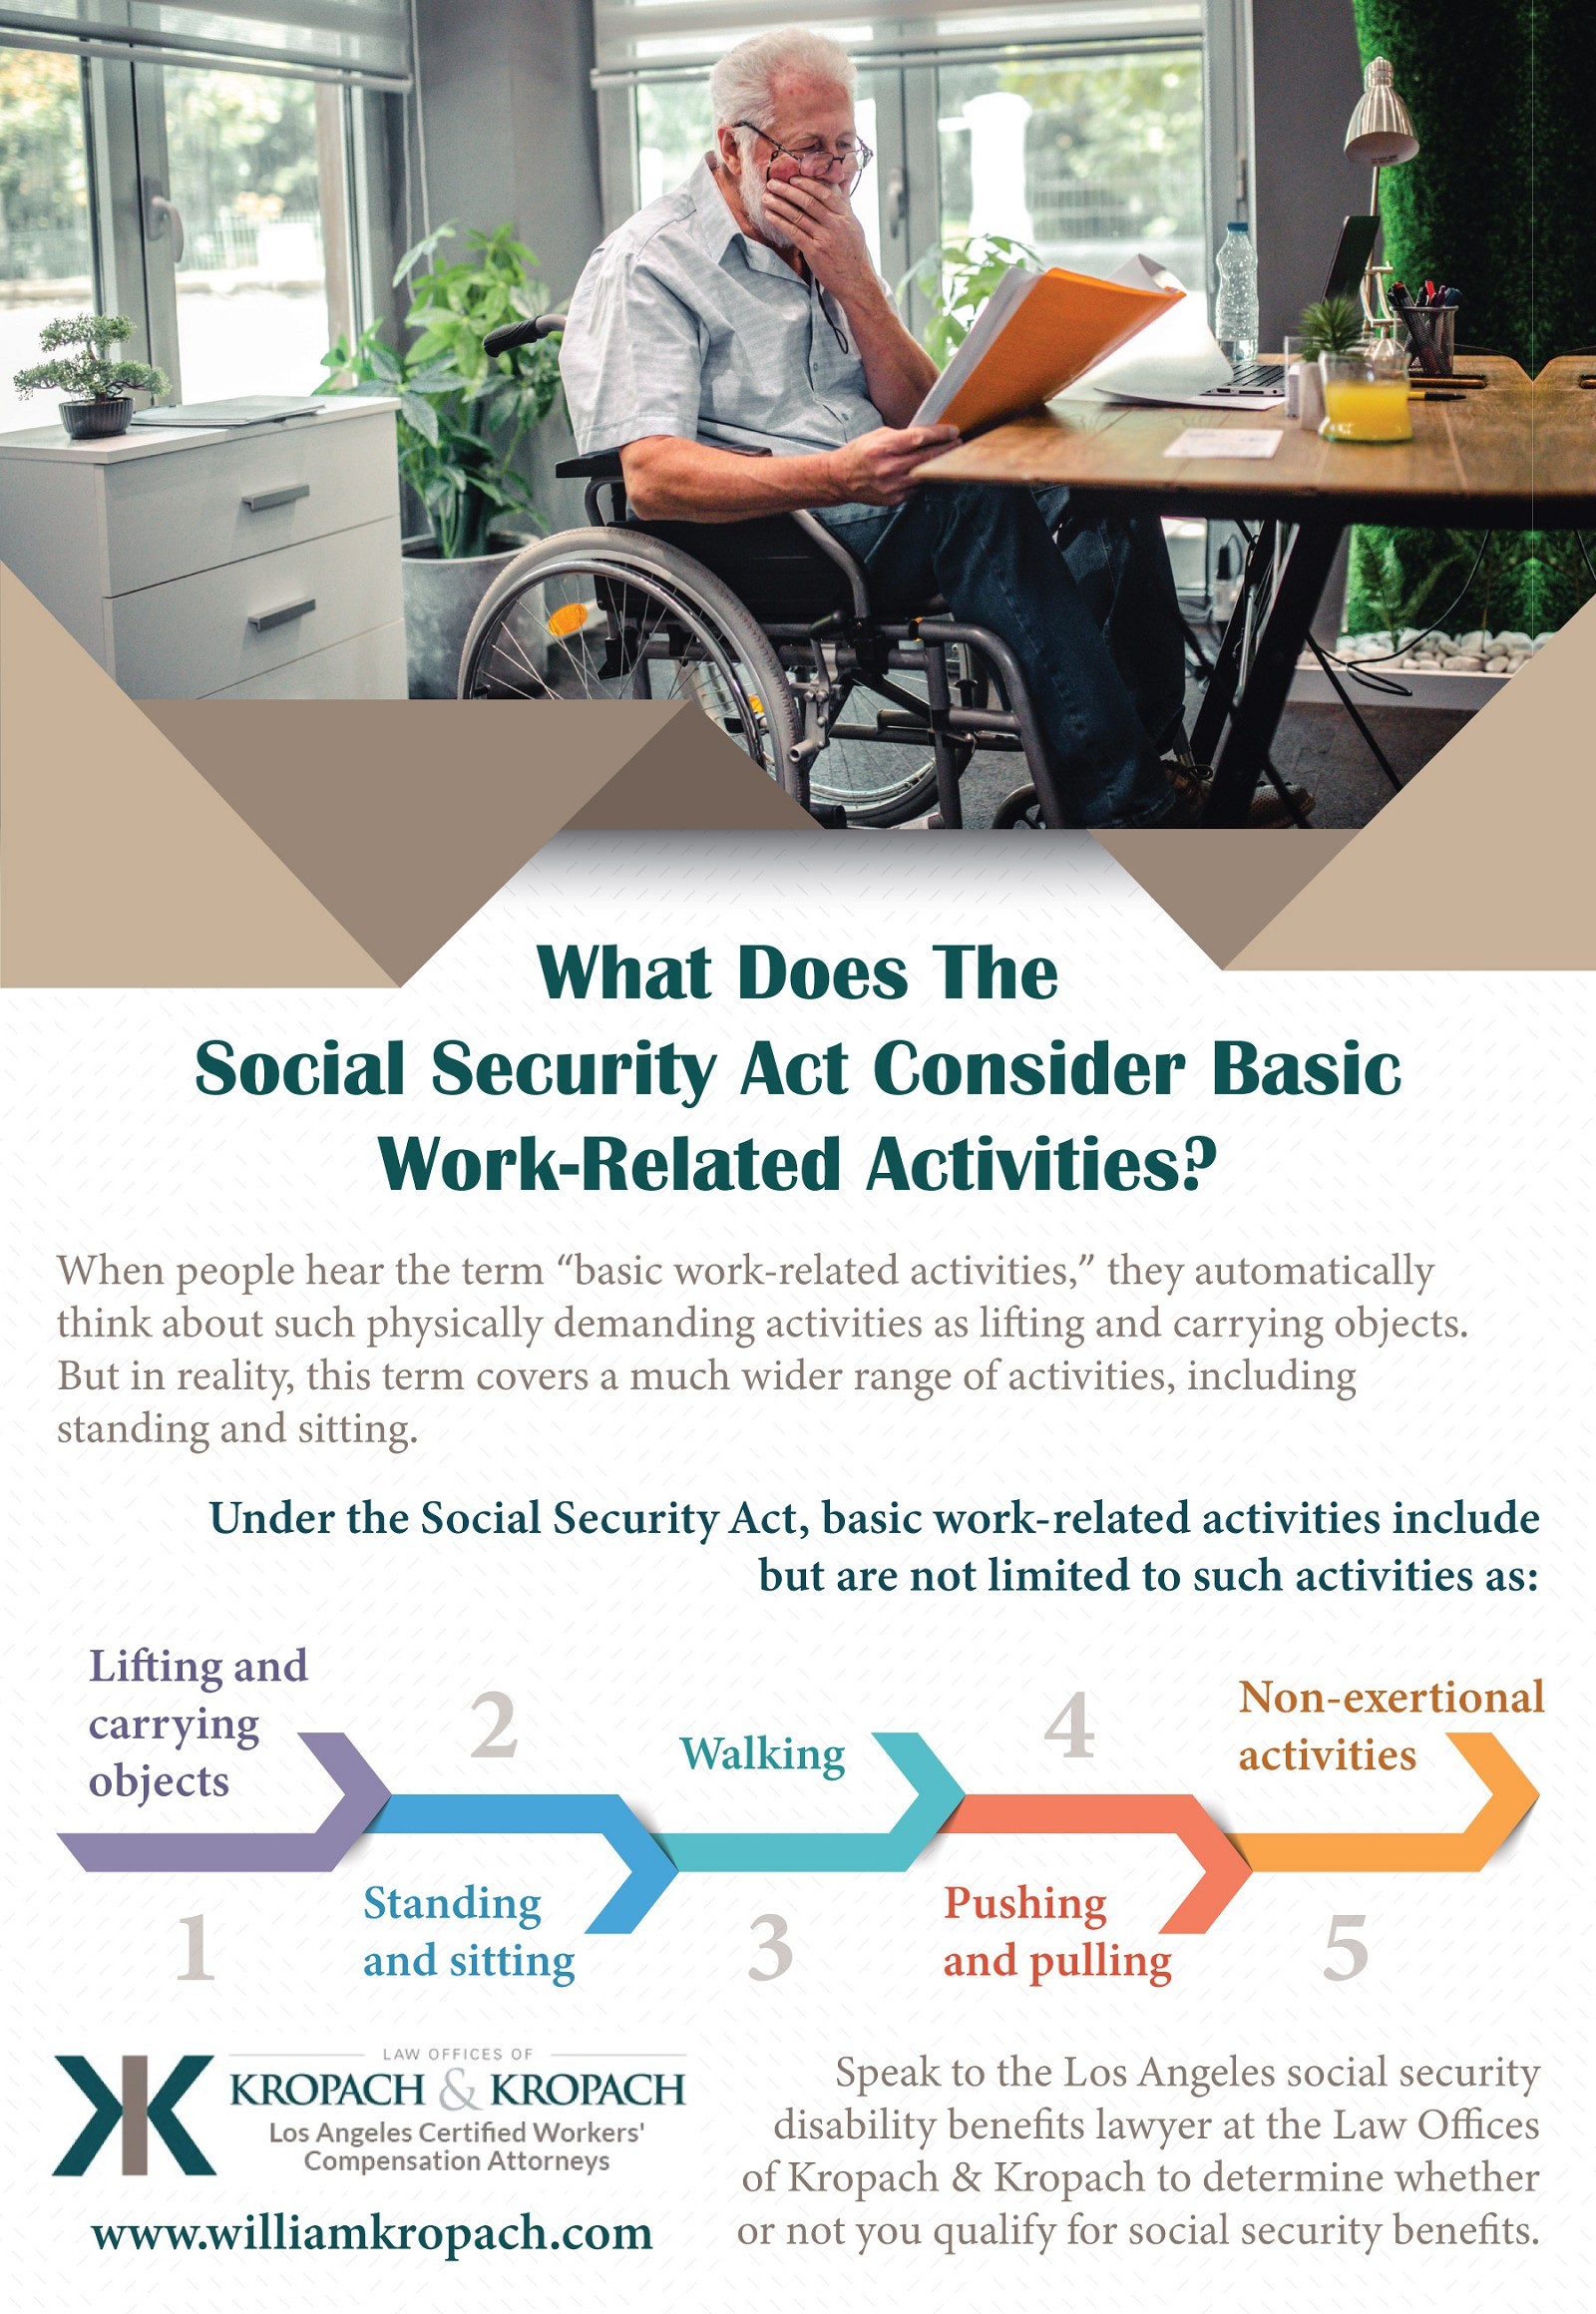 What Does The Social Security Basic Work-Related Activities?